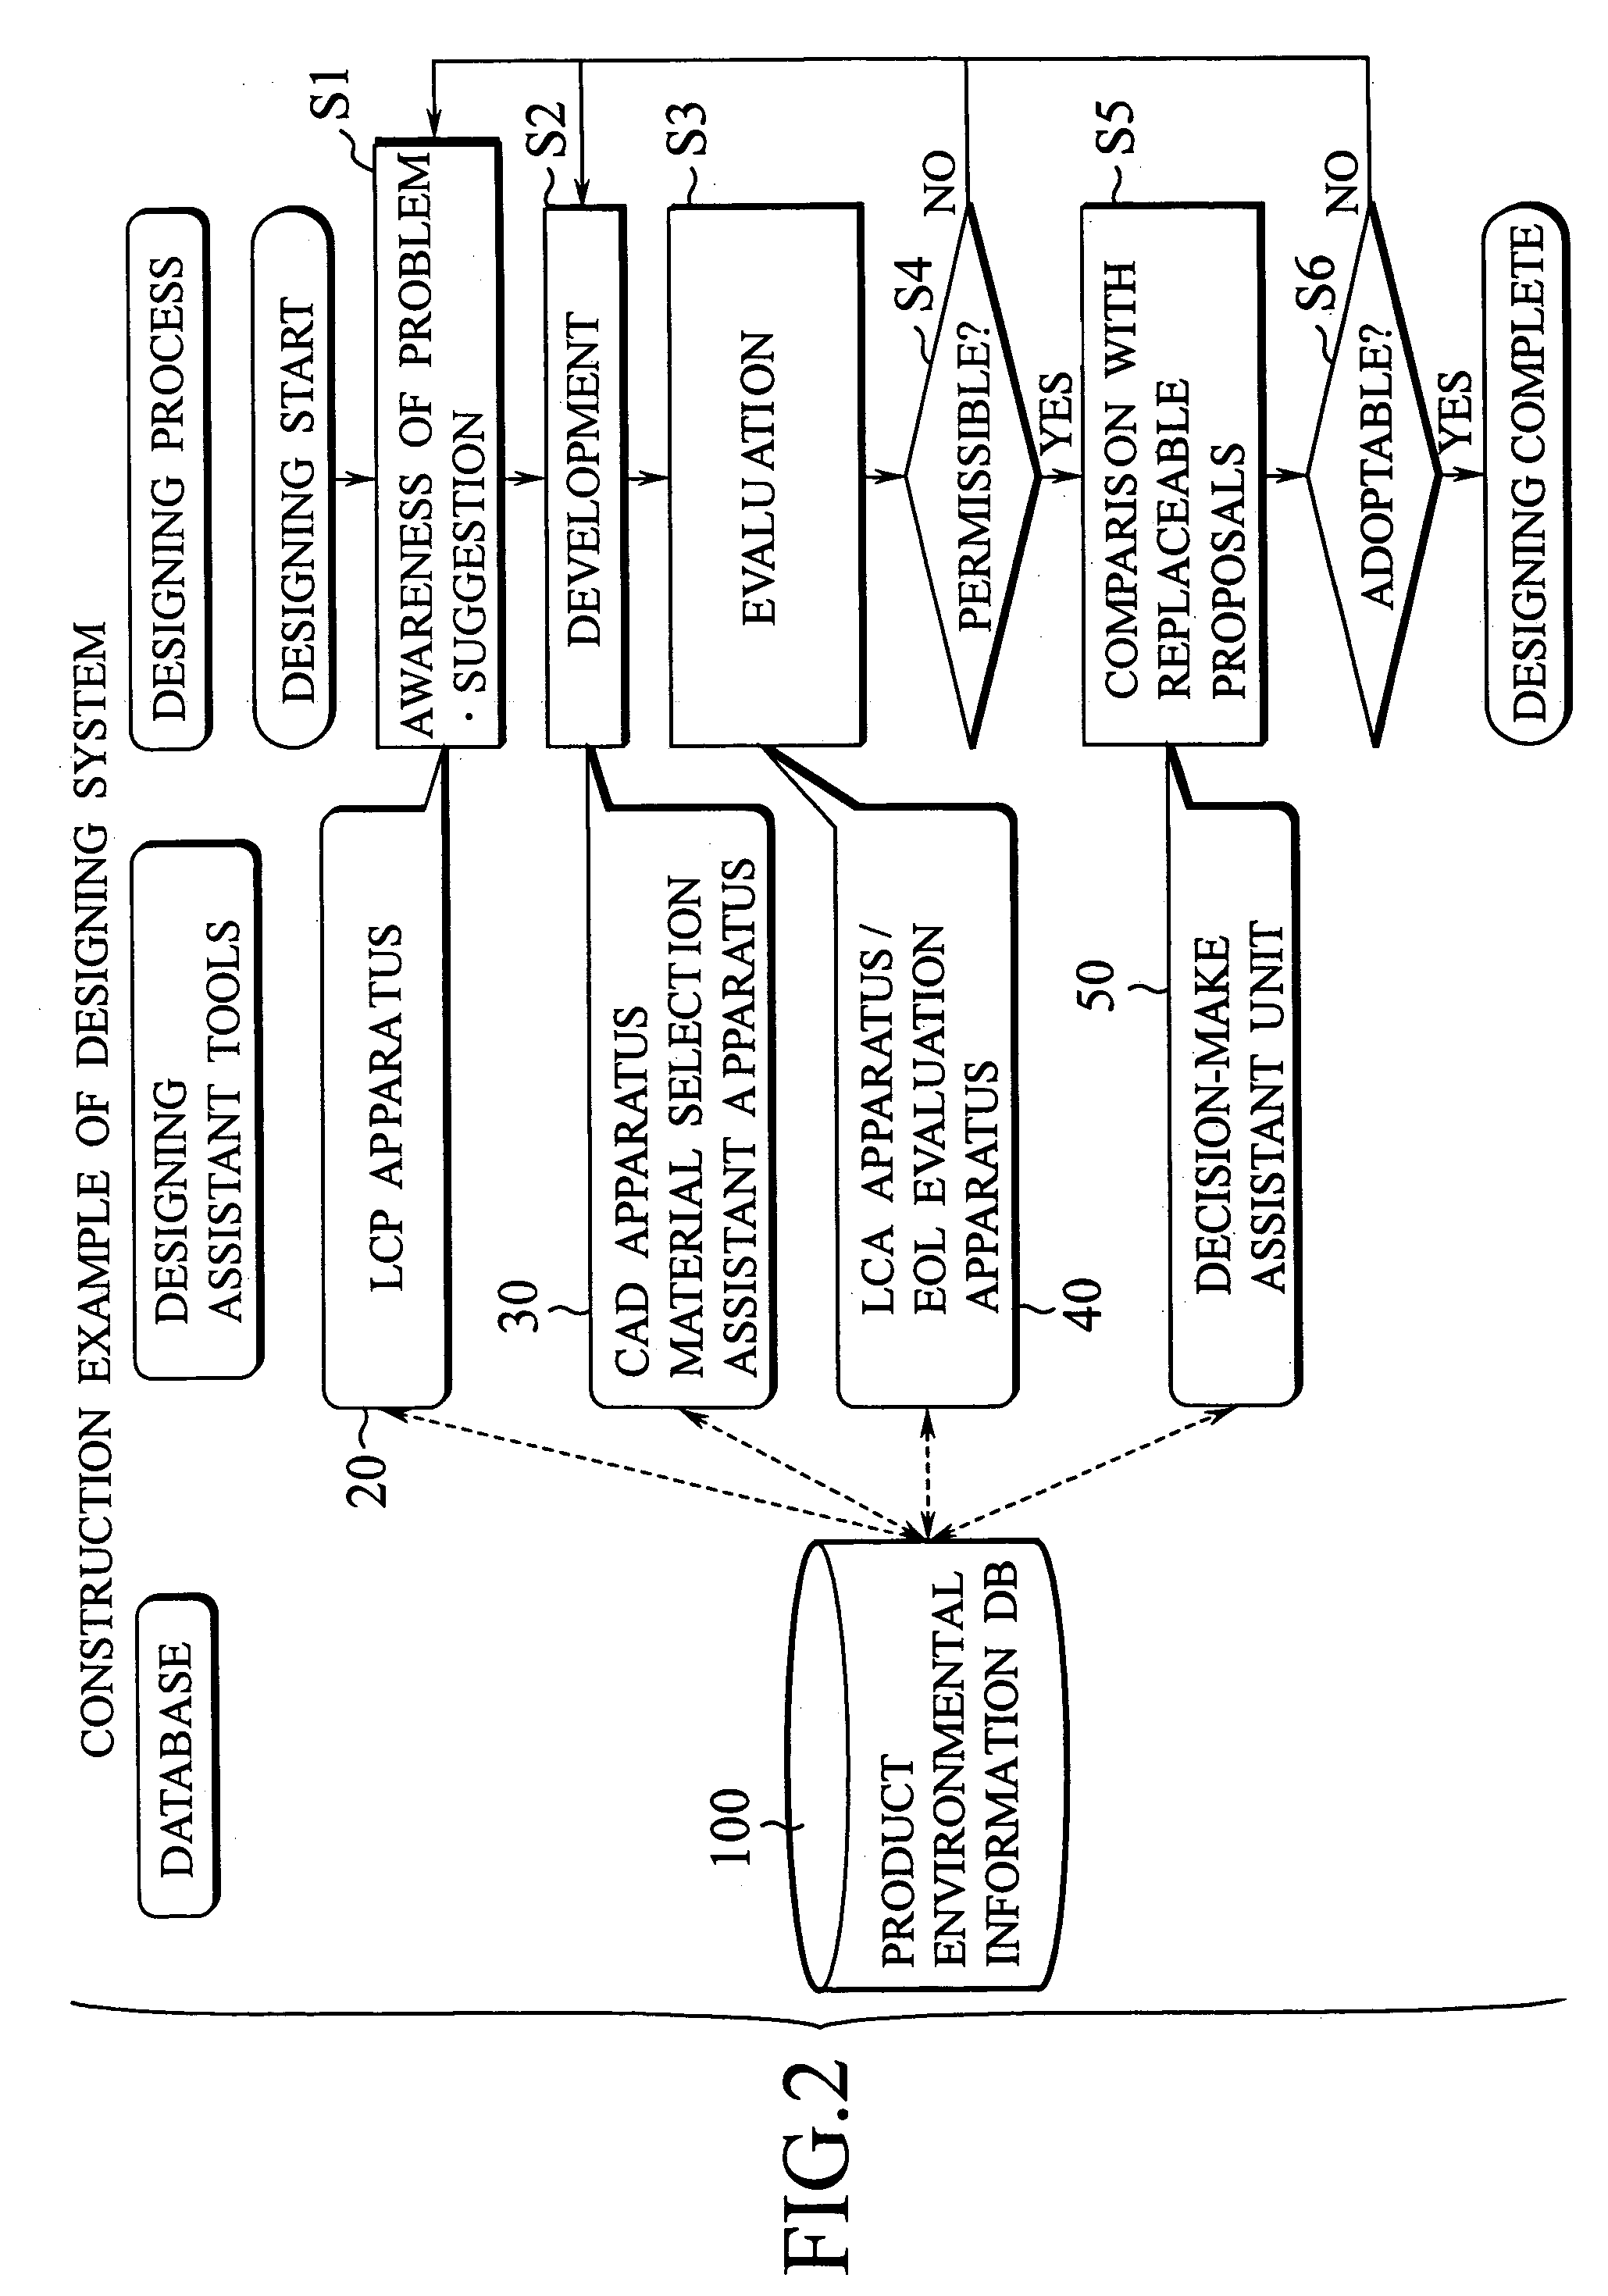 Computer-aided designing assistant apparatus and method of assisting designing of environmentally conscious product